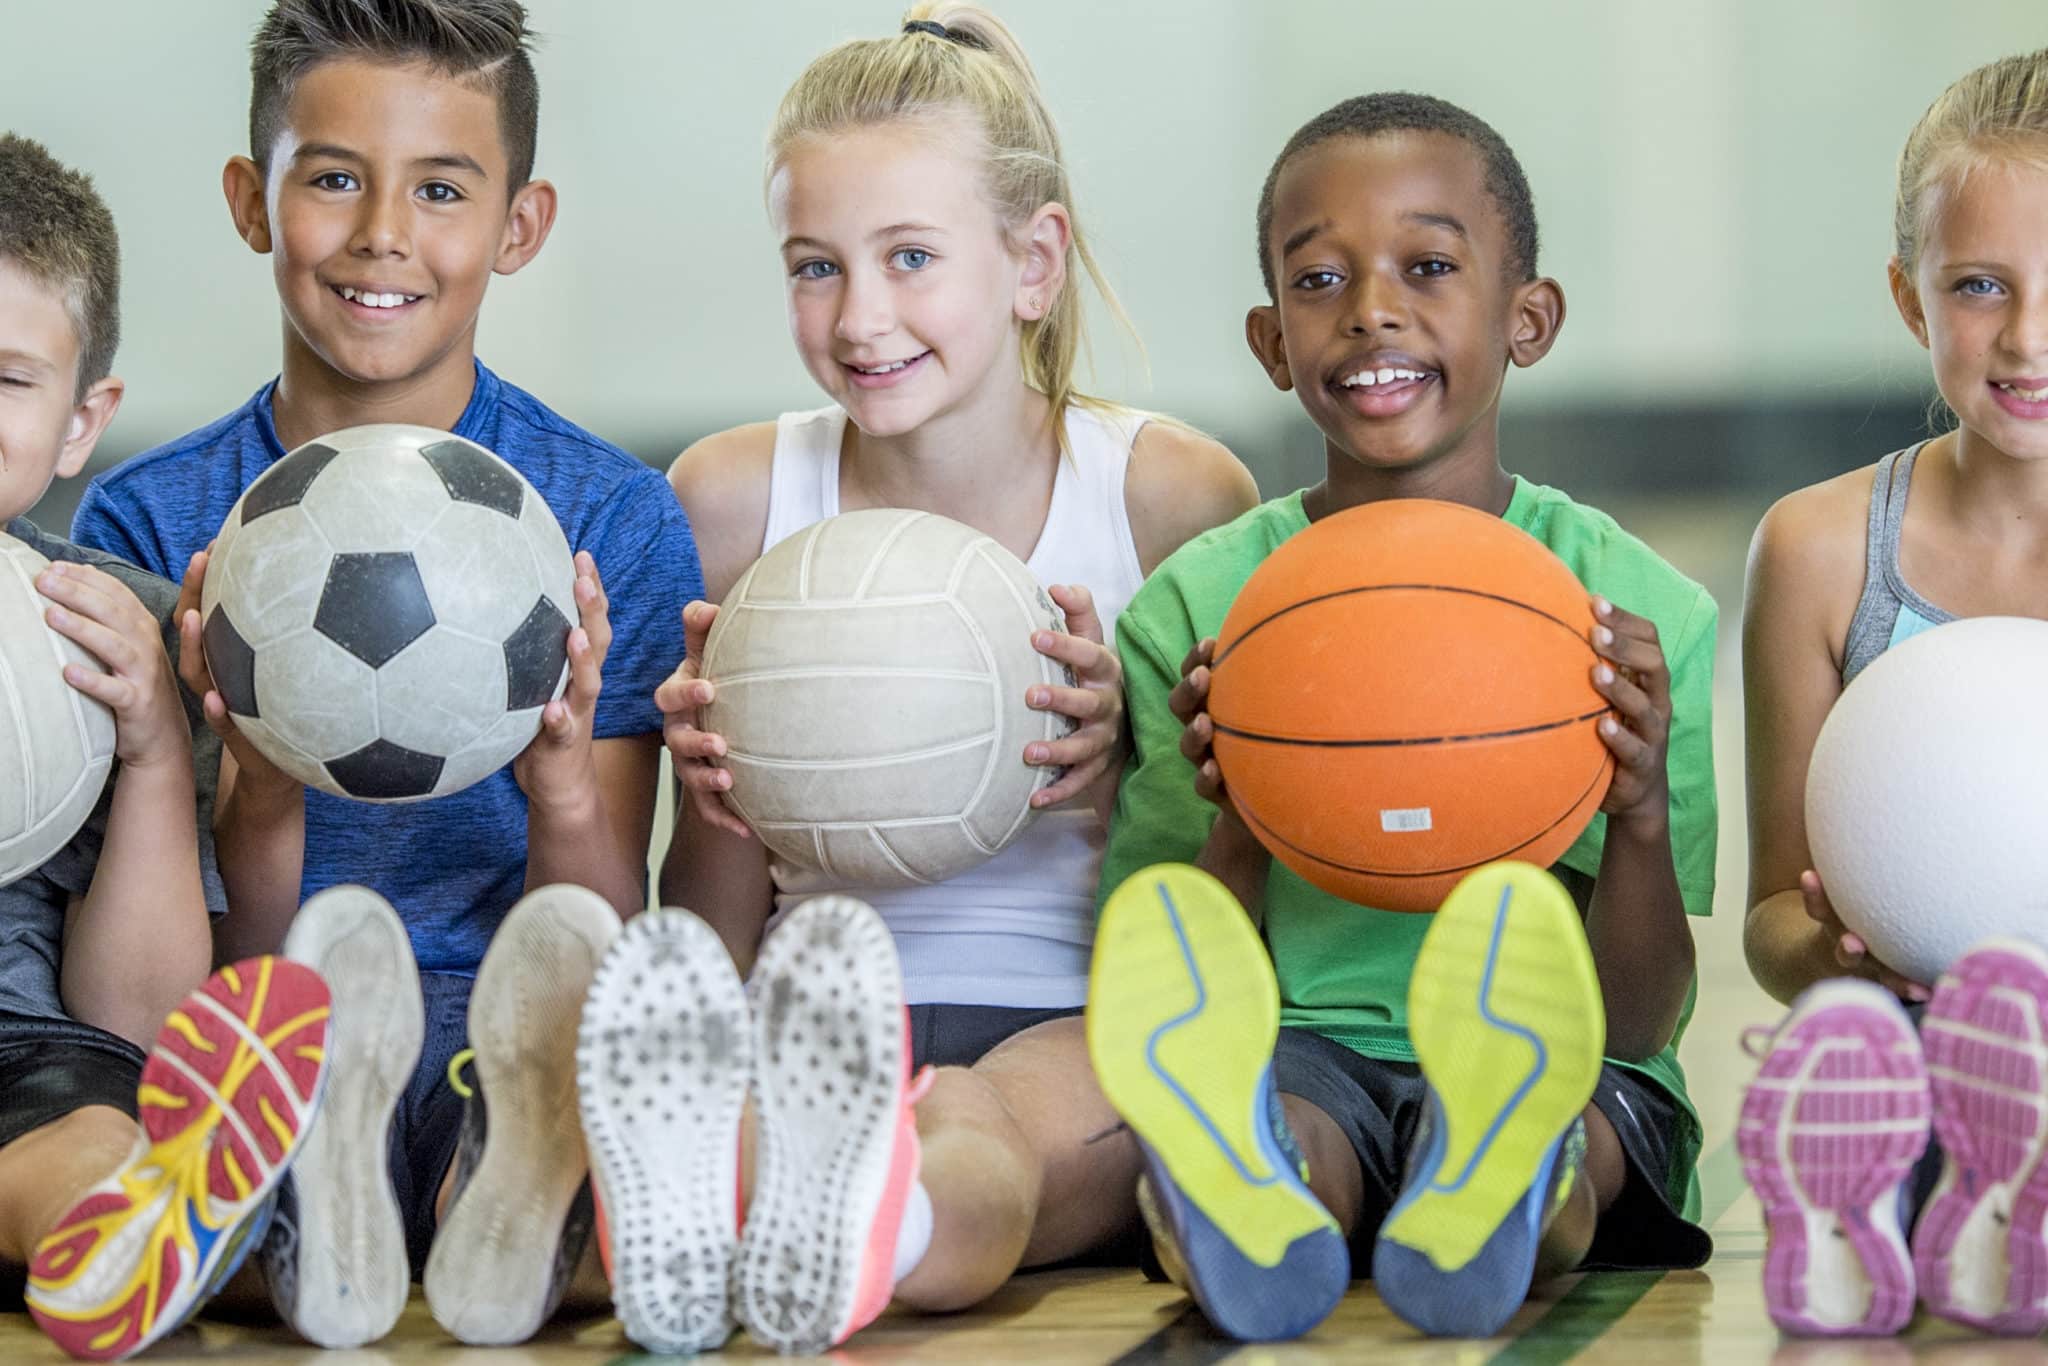 How to avoid children’s sports injuries